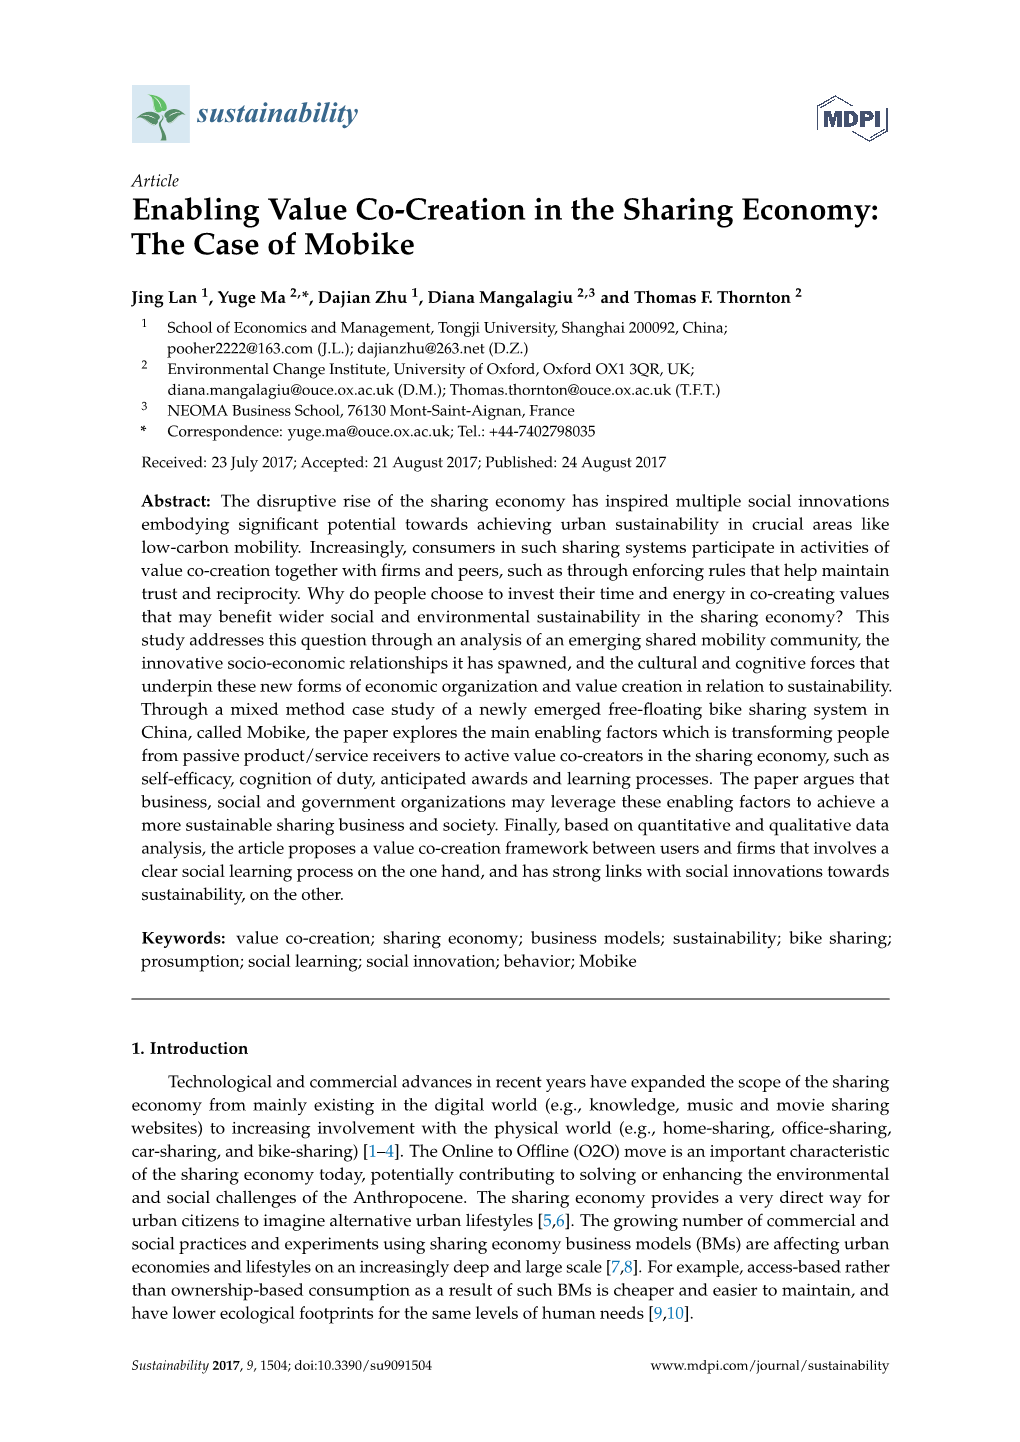 Enabling Value Co-Creation in the Sharing Economy: the Case of Mobike